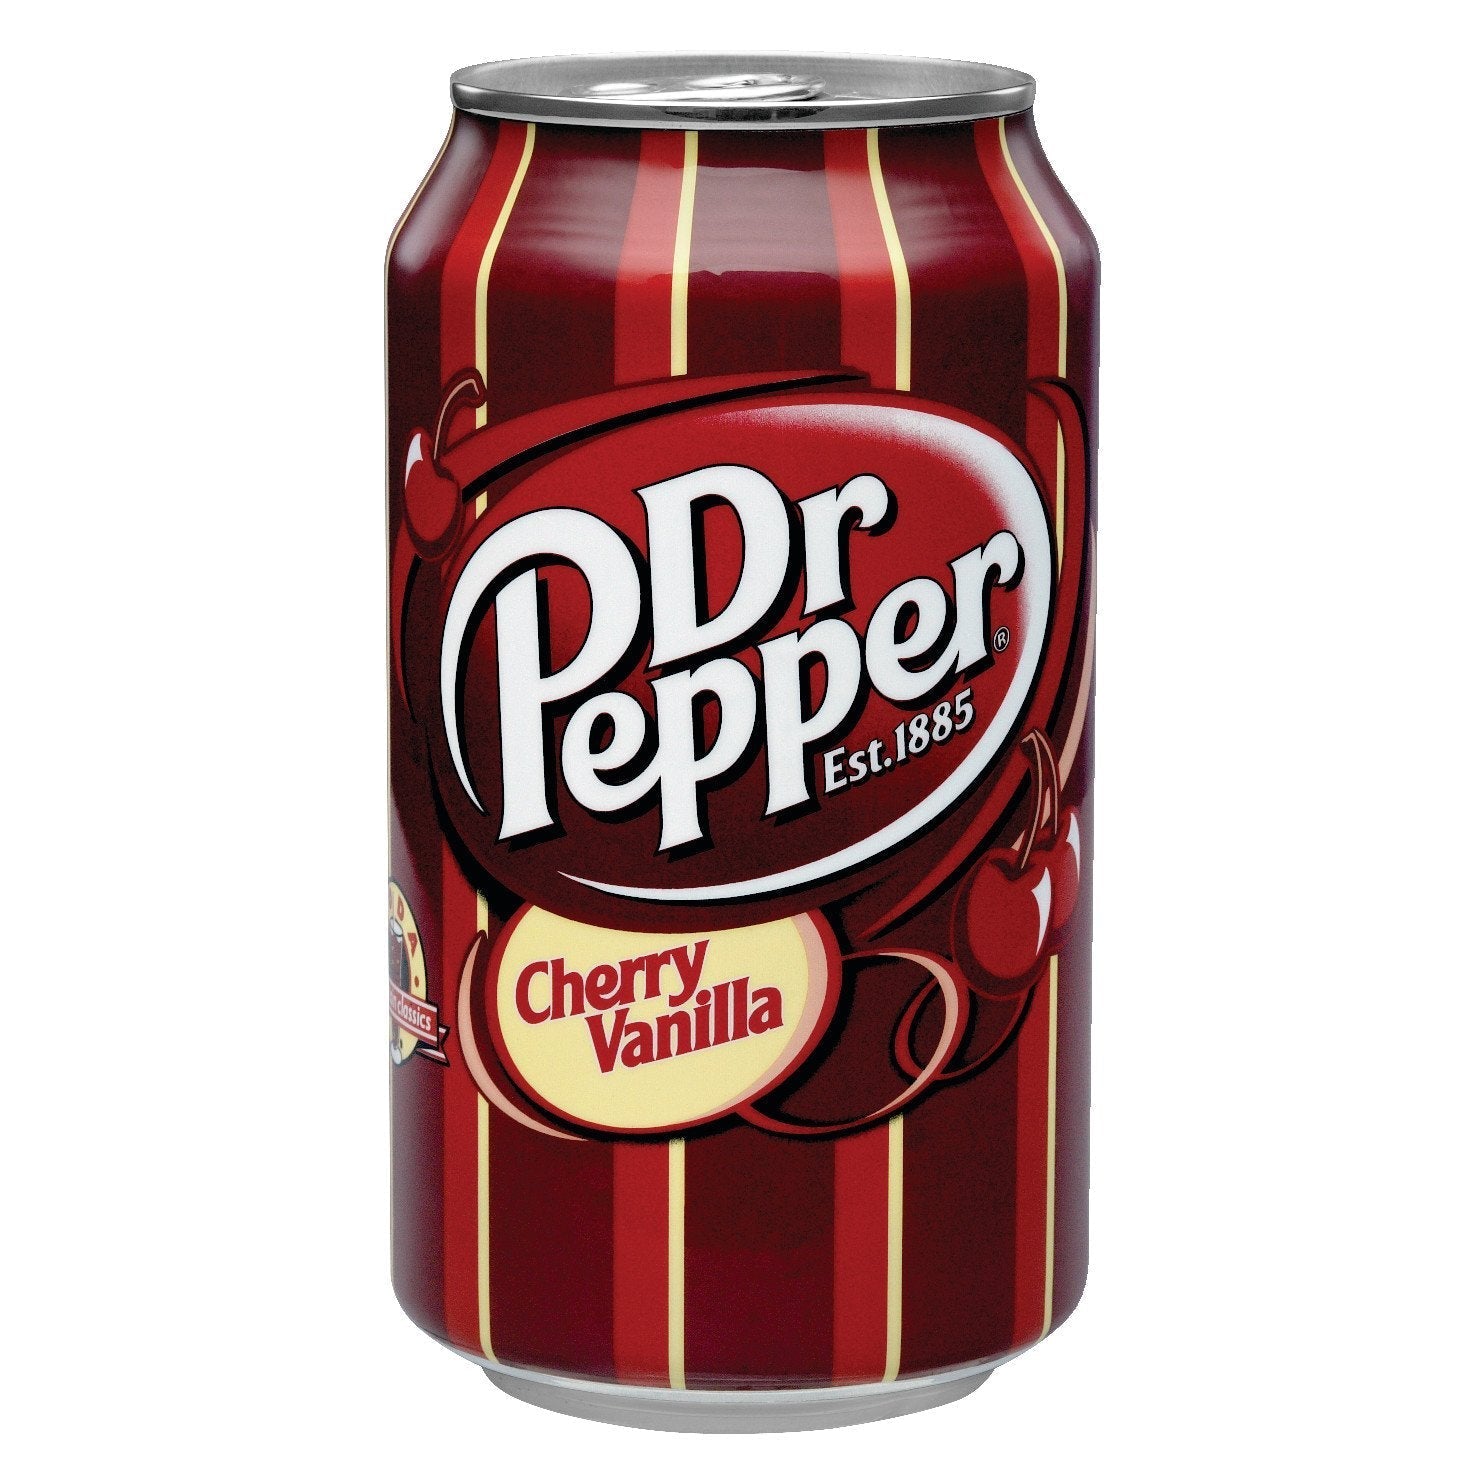 Dr Pepper Cherry Vanilla Flavoured Soda 355ml sold by American grocer Uk